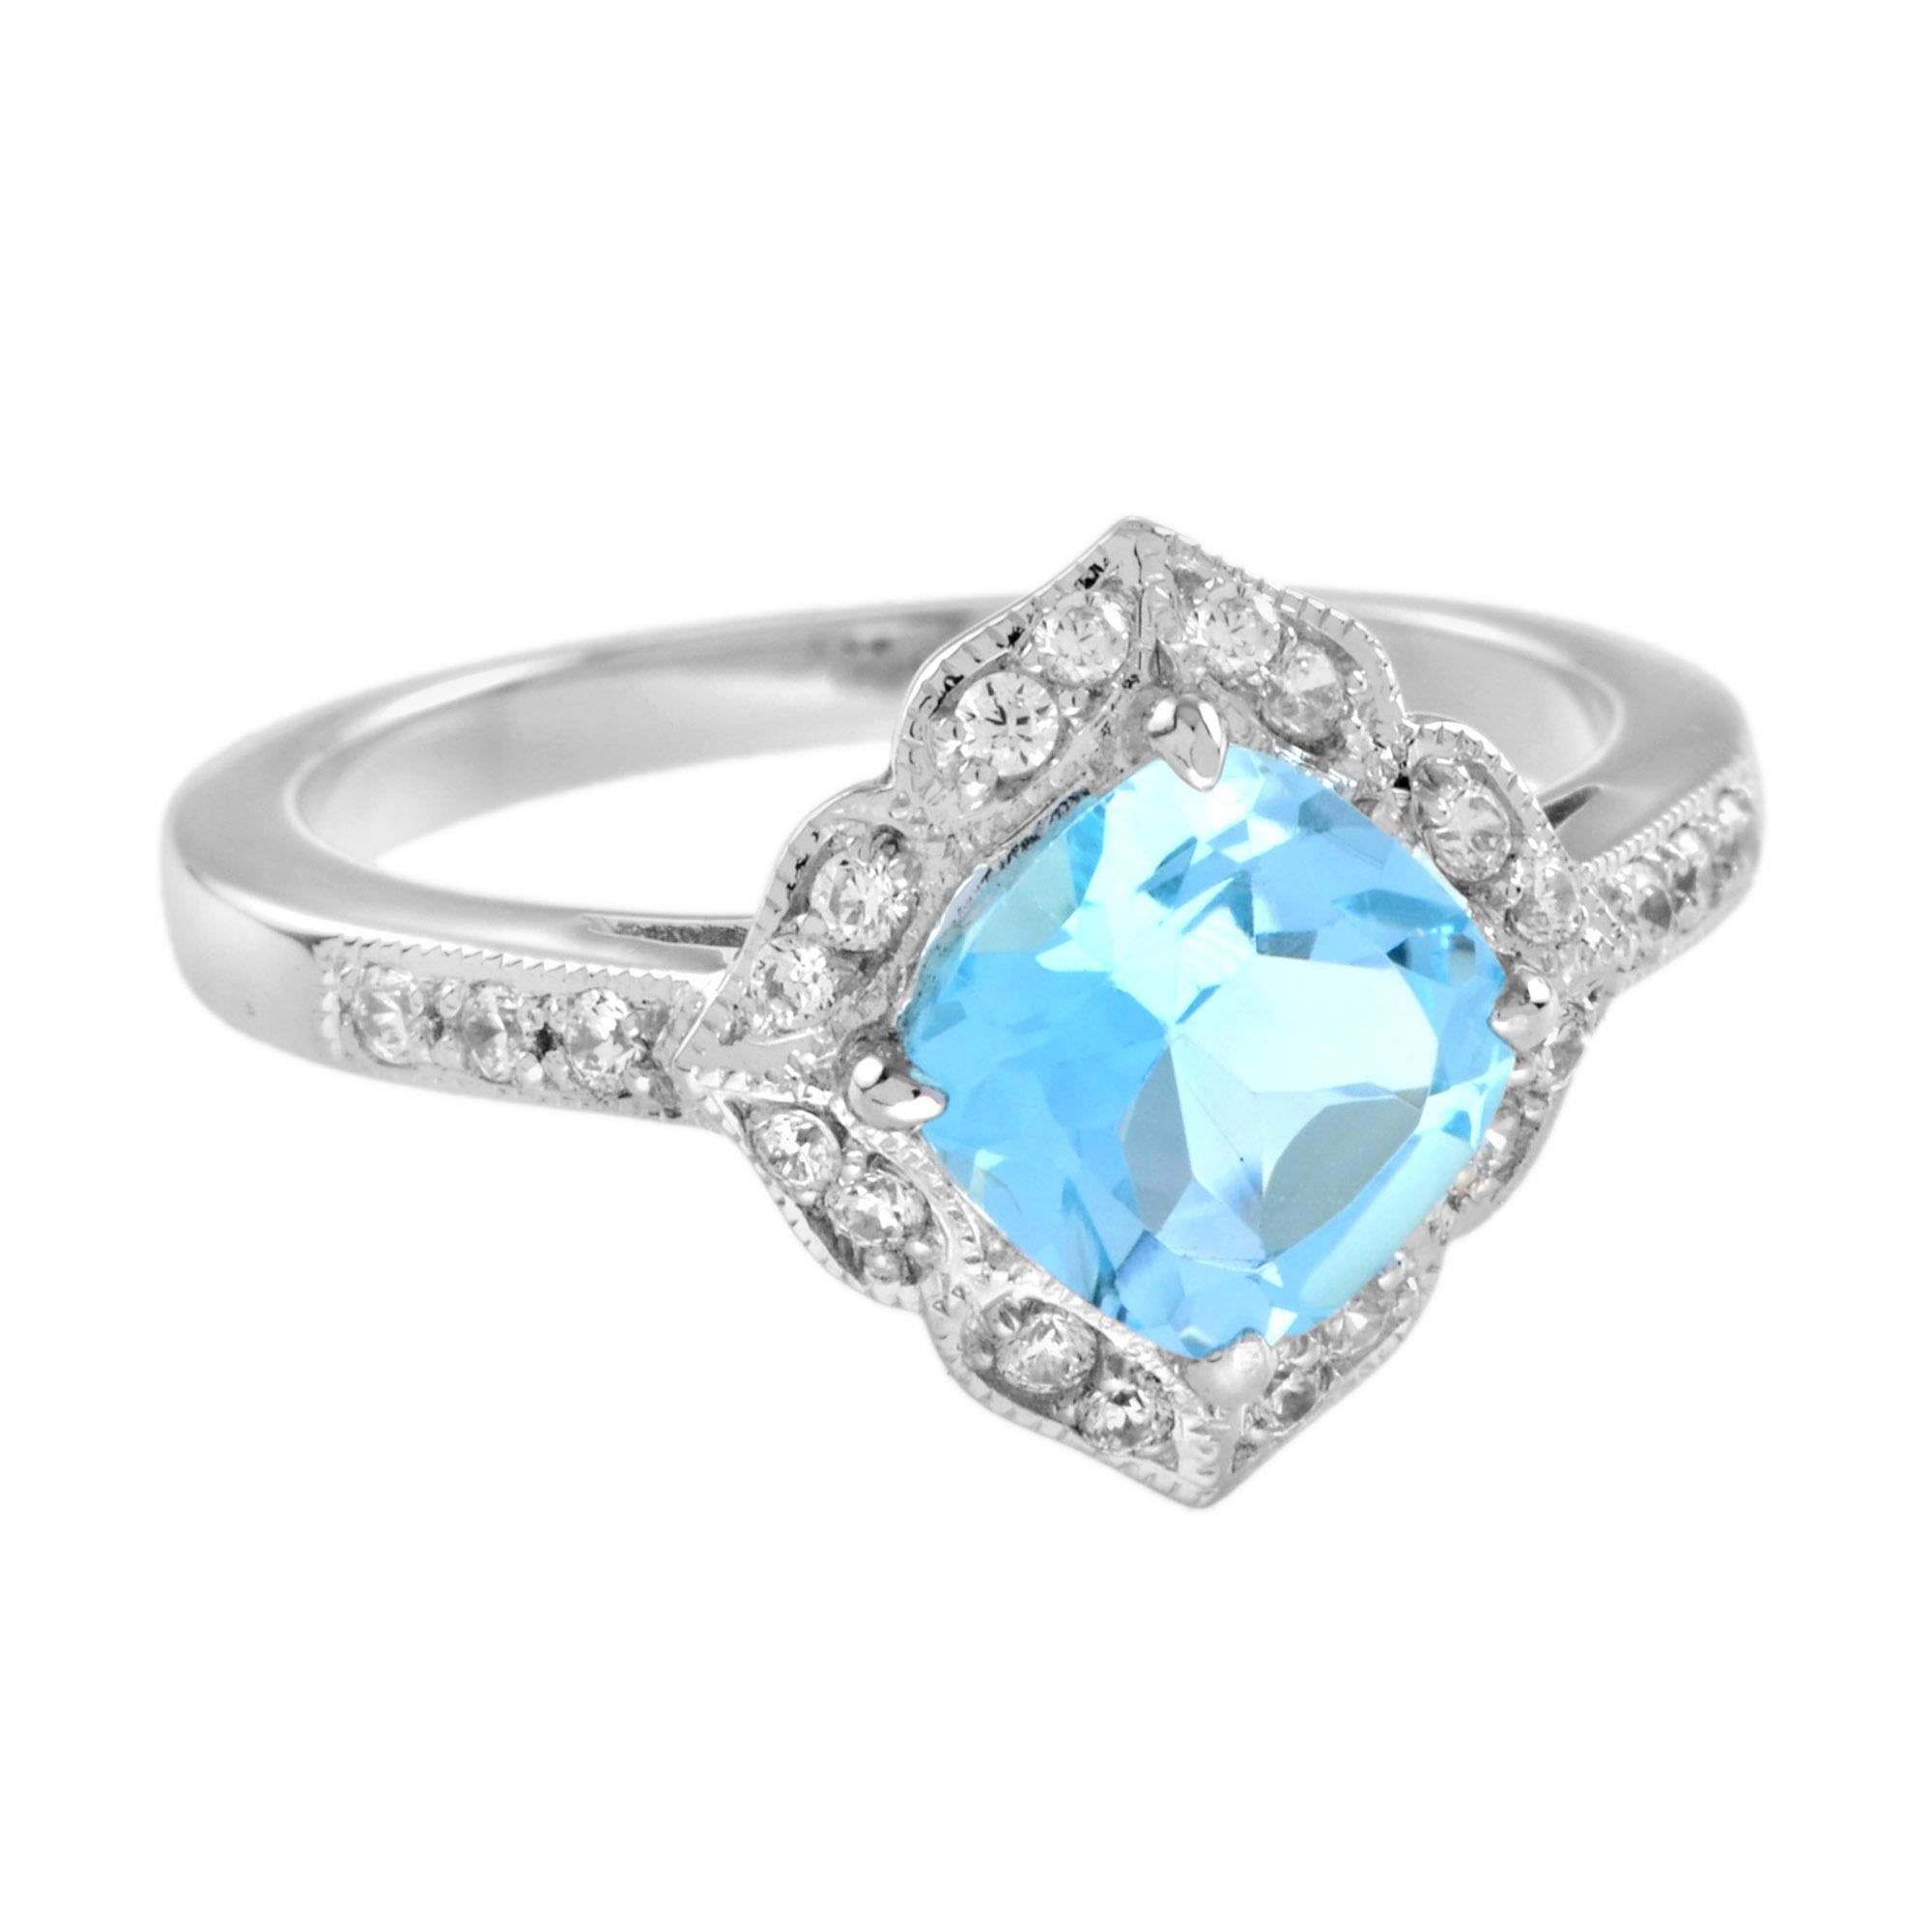 For Sale:  Cushion Blue Topaz and Diamond Vintage Style Engagement Ring in 14K White Gold 3